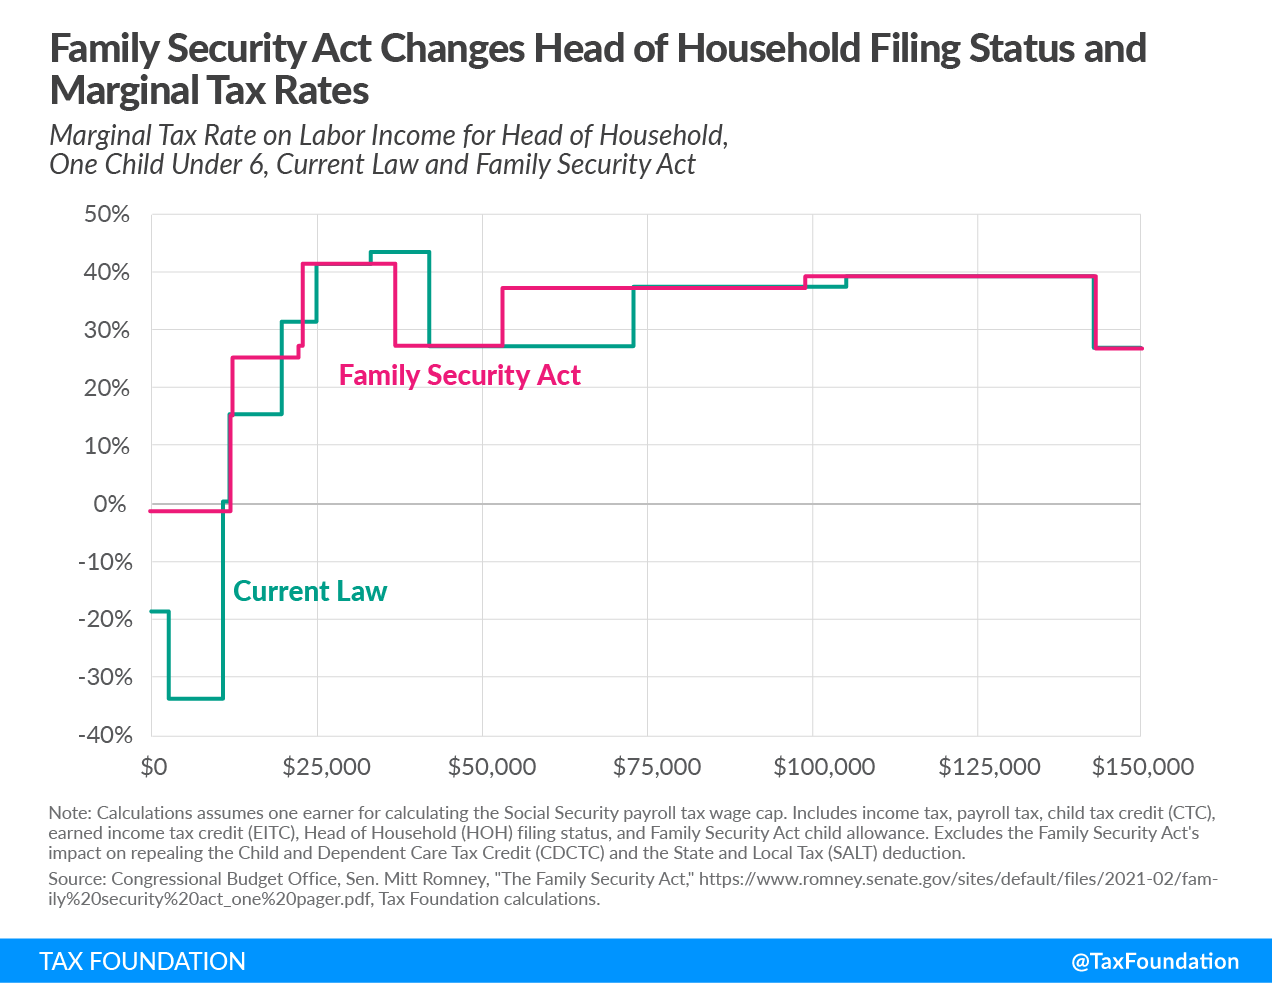 Head of Household Marginal Rates Comparison Under Current Law and Mitt Romney Family Security Act, 2021. Mitt Romney Child Tax Allowance